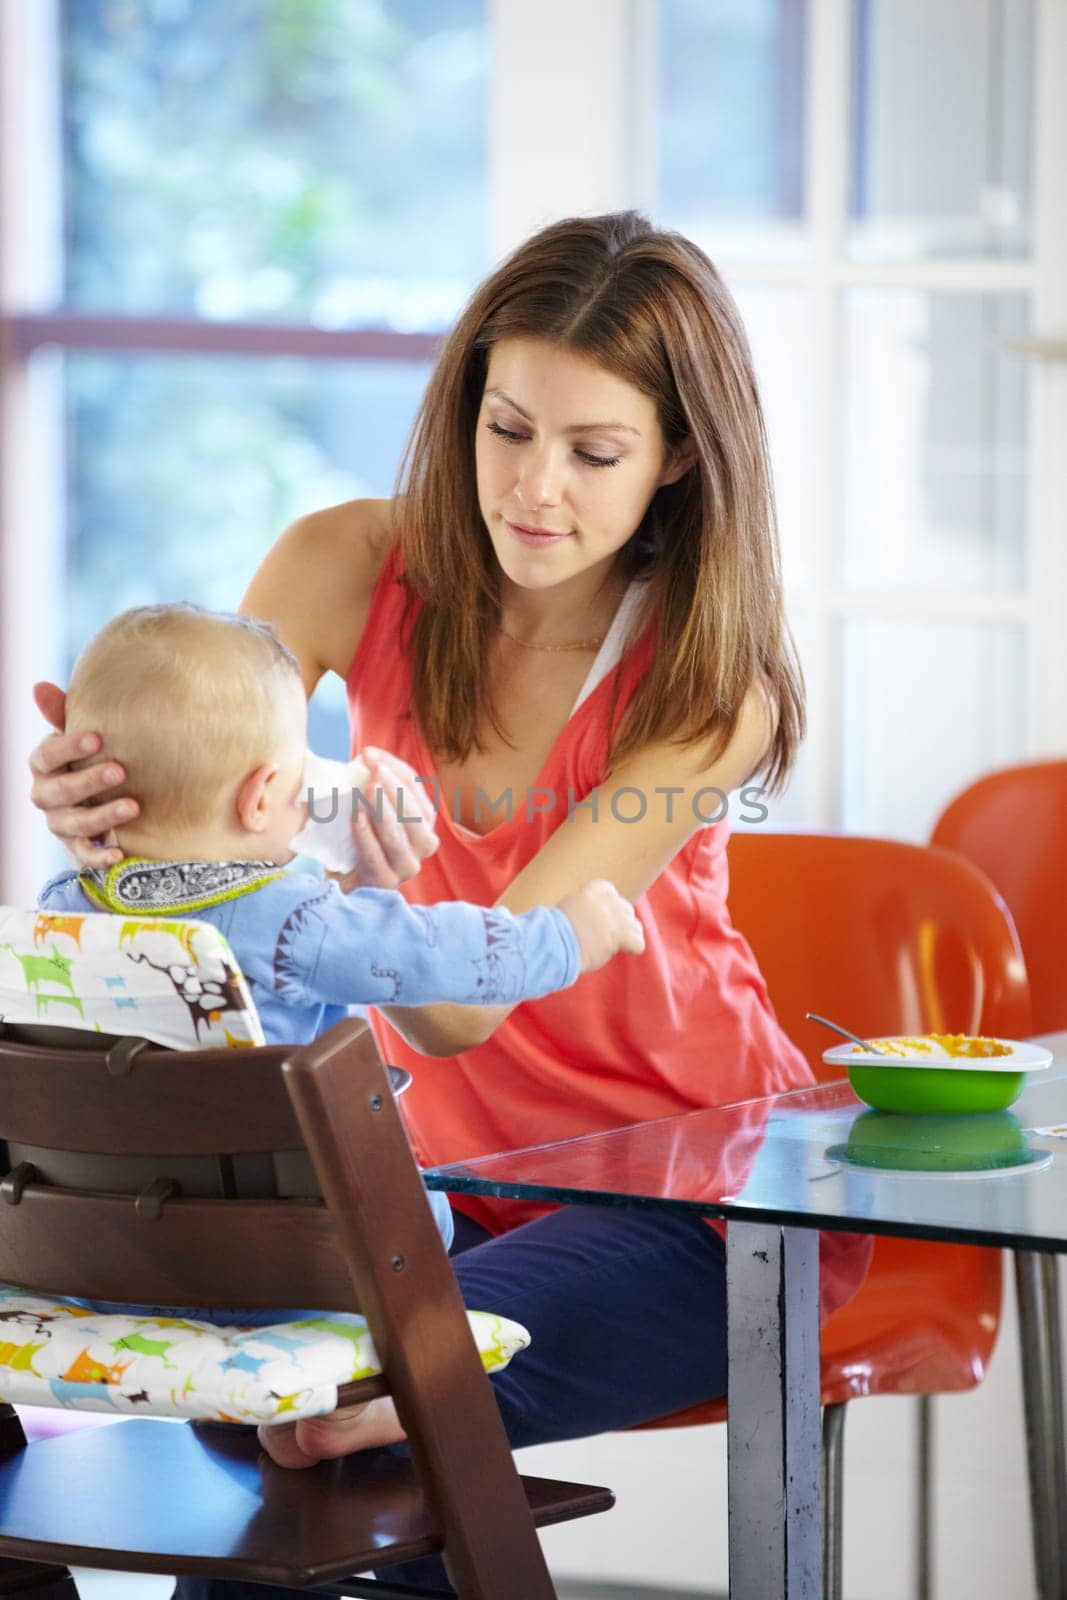 Mother, baby and food in feeding chair for nutrition, growth and development at table in kitchen of home. Woman, infant and cleaning face after eating, napkin and routine for love, care and nurture by YuriArcurs